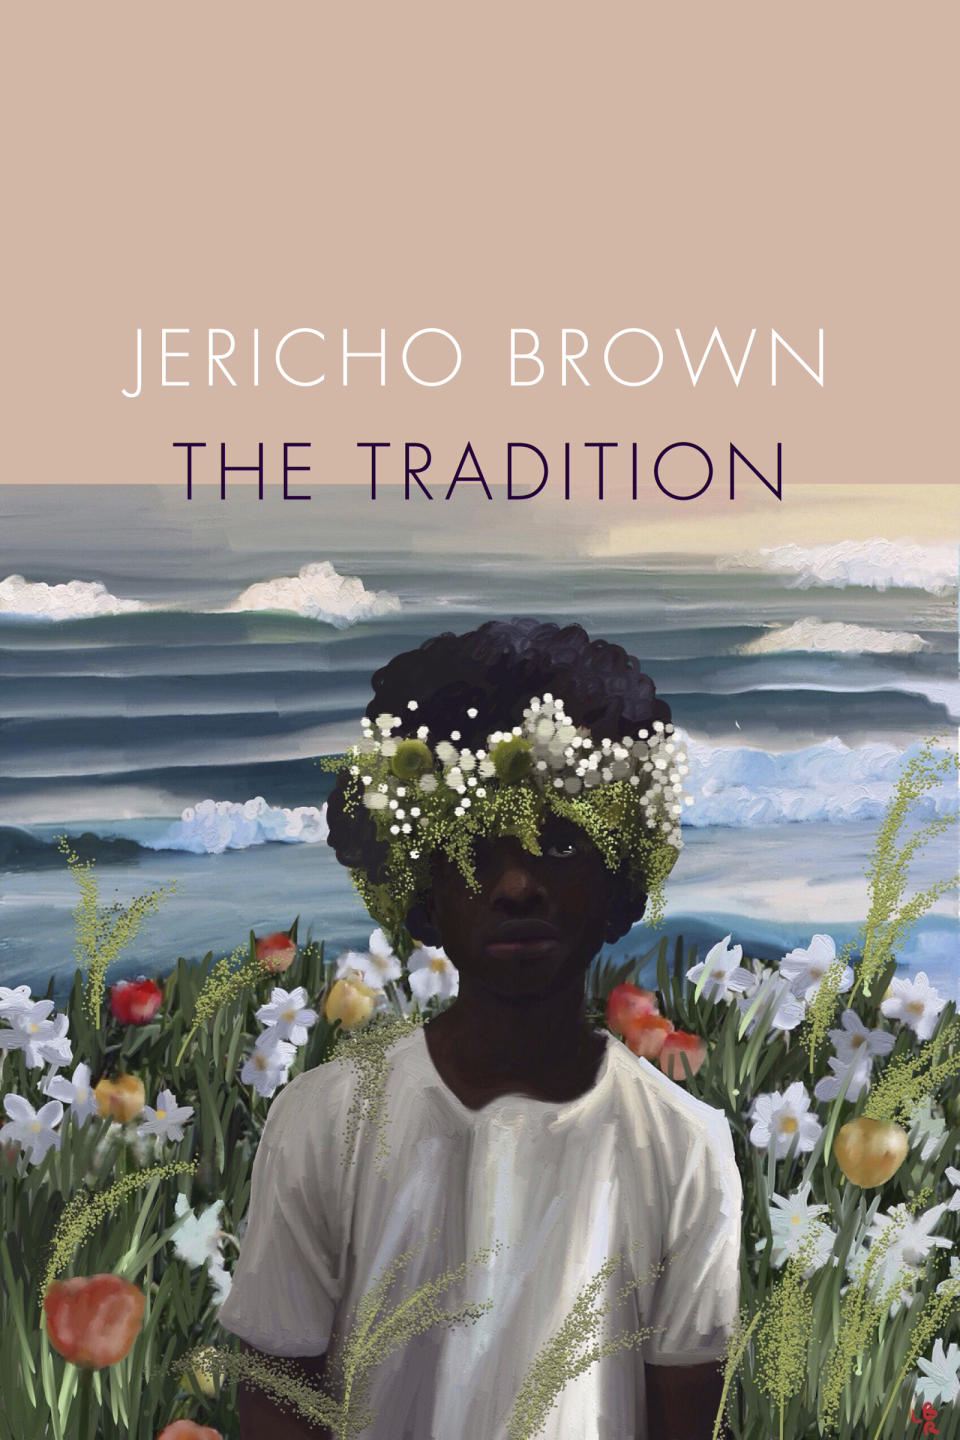 This image released by Copper Canyon Press shows "The Tradition," by Jericho Brown, winner of the Pulitzer Prize for Poetry. (Copper Canyon Press via AP)